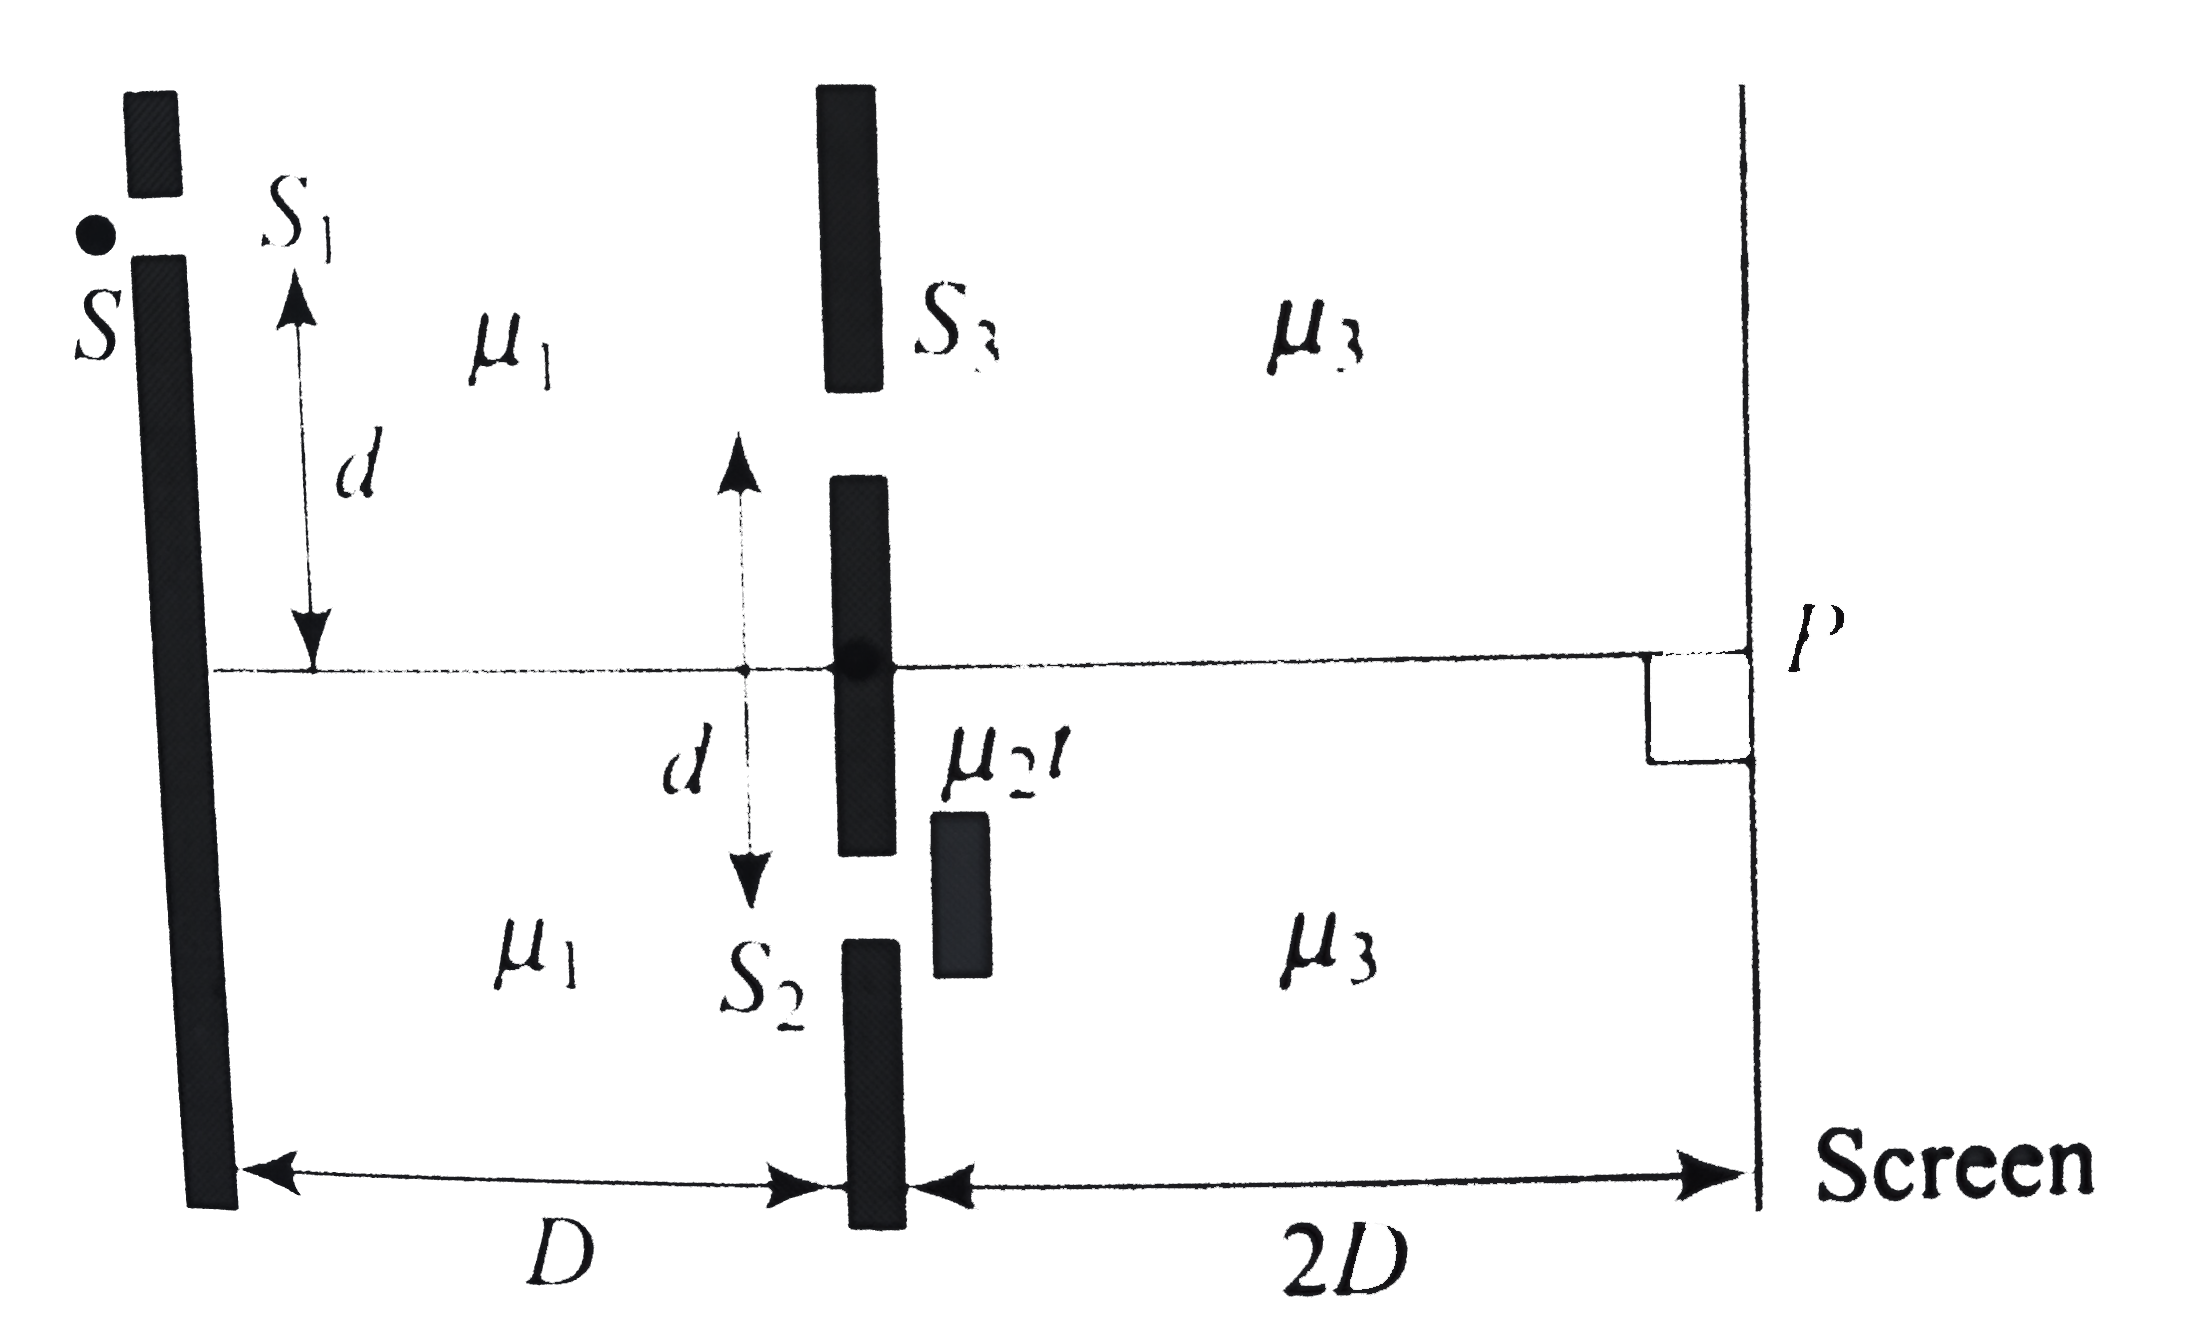 In figure S is a monochromatic source of light emitting light of wavelength of wavelength lambda  (in air). Light on slits S(1) from S and then reaches in the slit S(2) and S(3) through a medium of refractive index mu(1). Light from slit S(2) and S(3) reaches the screen through a medium of refractive index mu(3). A thin transparent film of refractive index mu(2) and thickness t is used placed in front of S(2). Point P is symmetrical w.r.t. S(2) and S(3). Using the values d = 1 mm, D = 1 m, mu(1) = 4//3,   mu(2) = 3//2, mu(3) = 9//5, and t = (4)/(9) xx 10^(-5) m,   a. find distance of central maxima from P,   b. If the film in front of S(2) is removed, then by what distance and in which direction will be central maxima shift ?   .